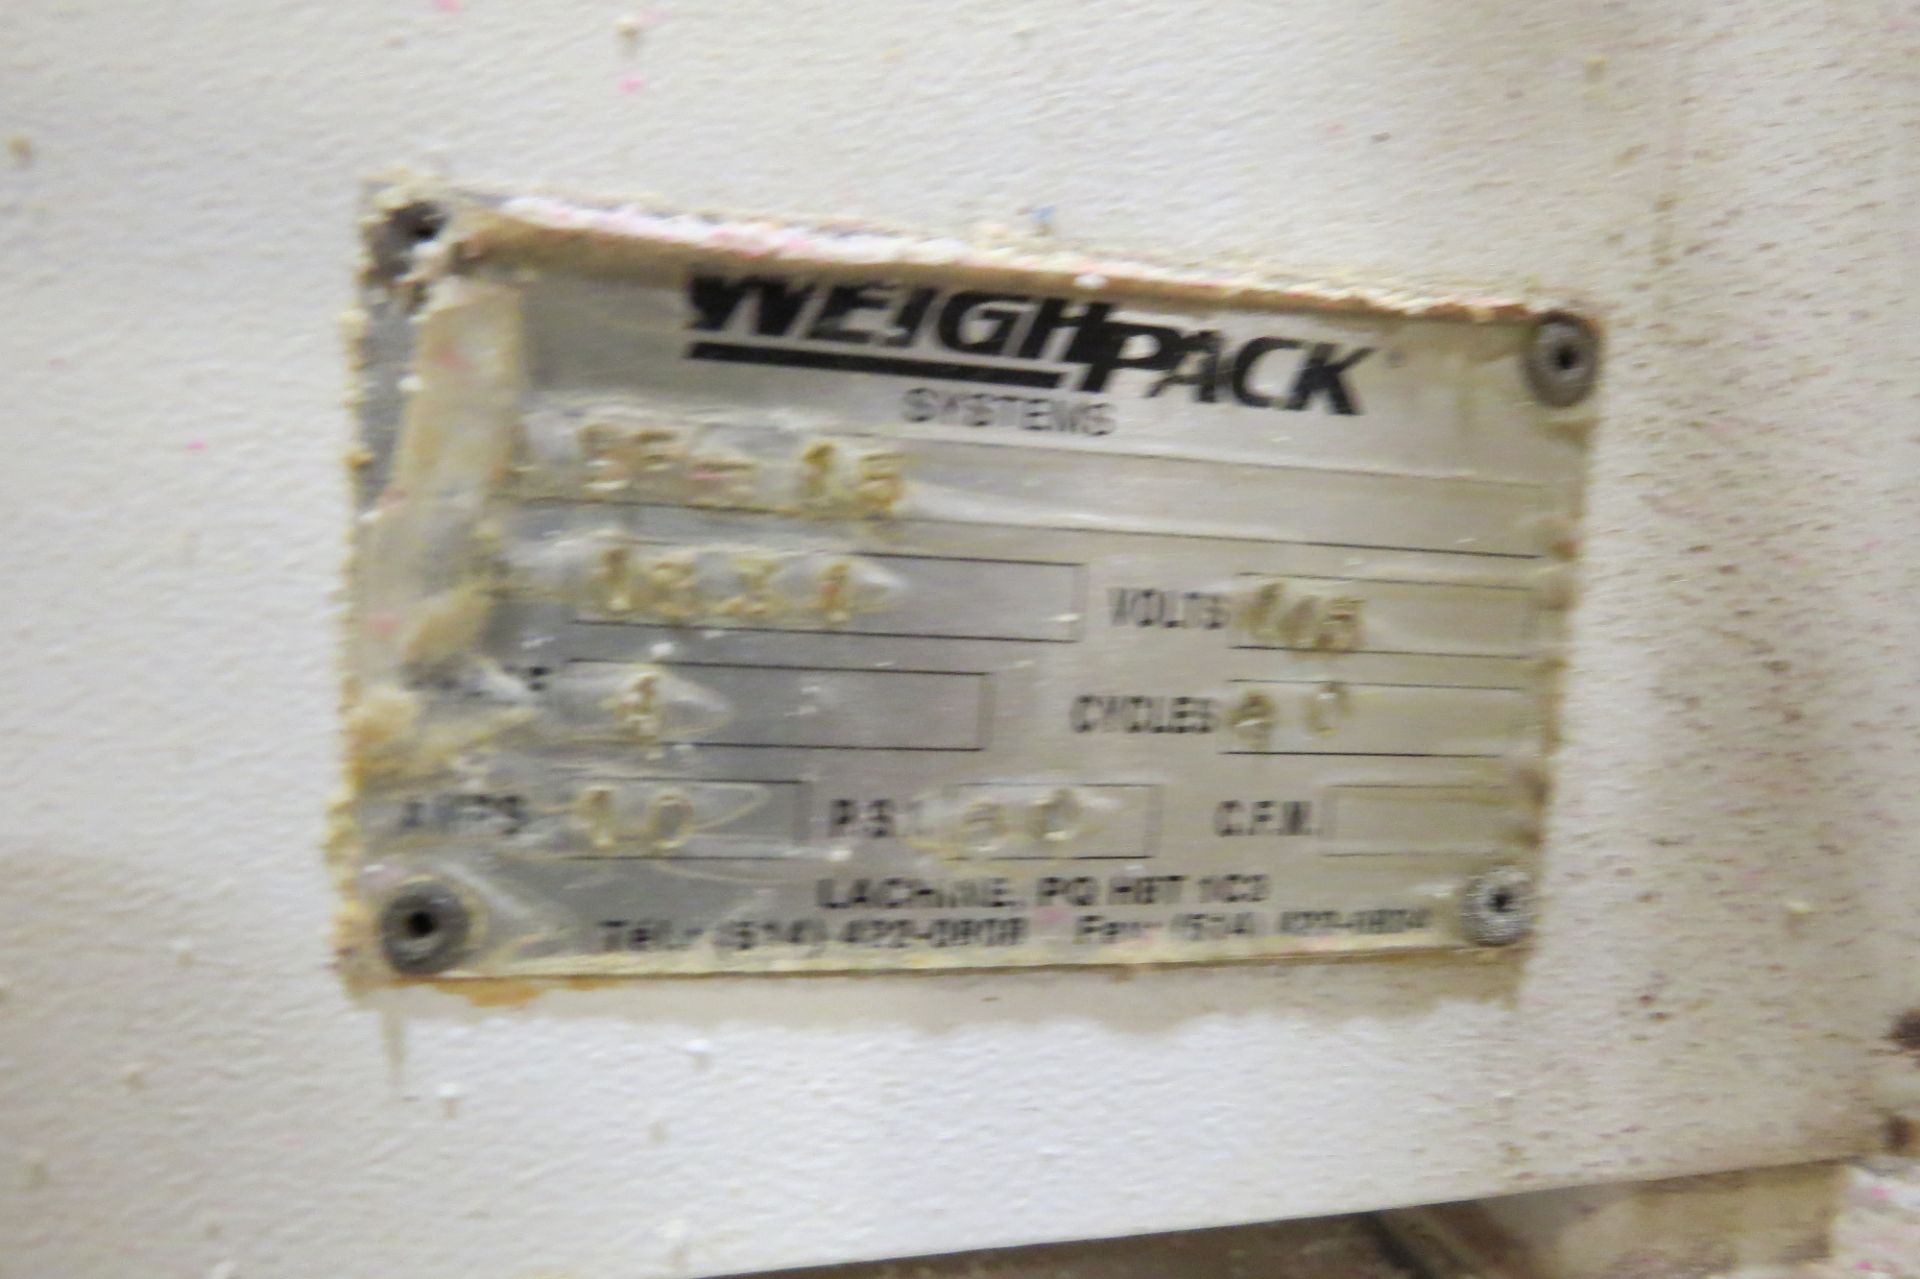 WEIGHPACK Multi-Trix Scale Filler machine mod. AEF-15, ser. 1331 with steel support frame - Image 11 of 25